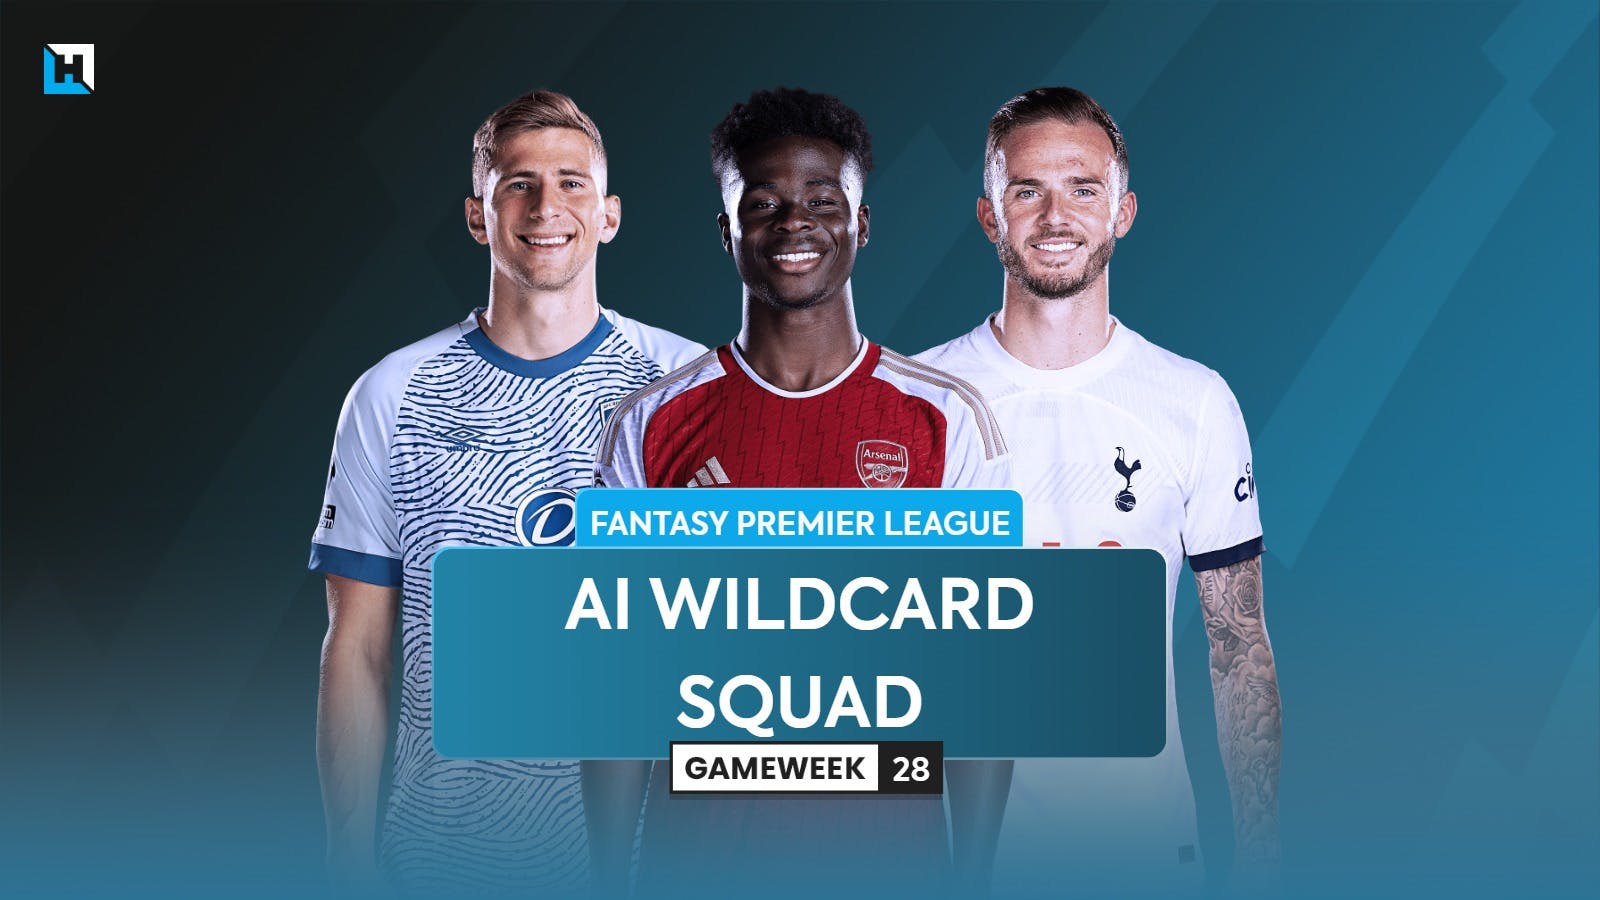 The best FPL Wildcard team for Gameweek 28 according to AI